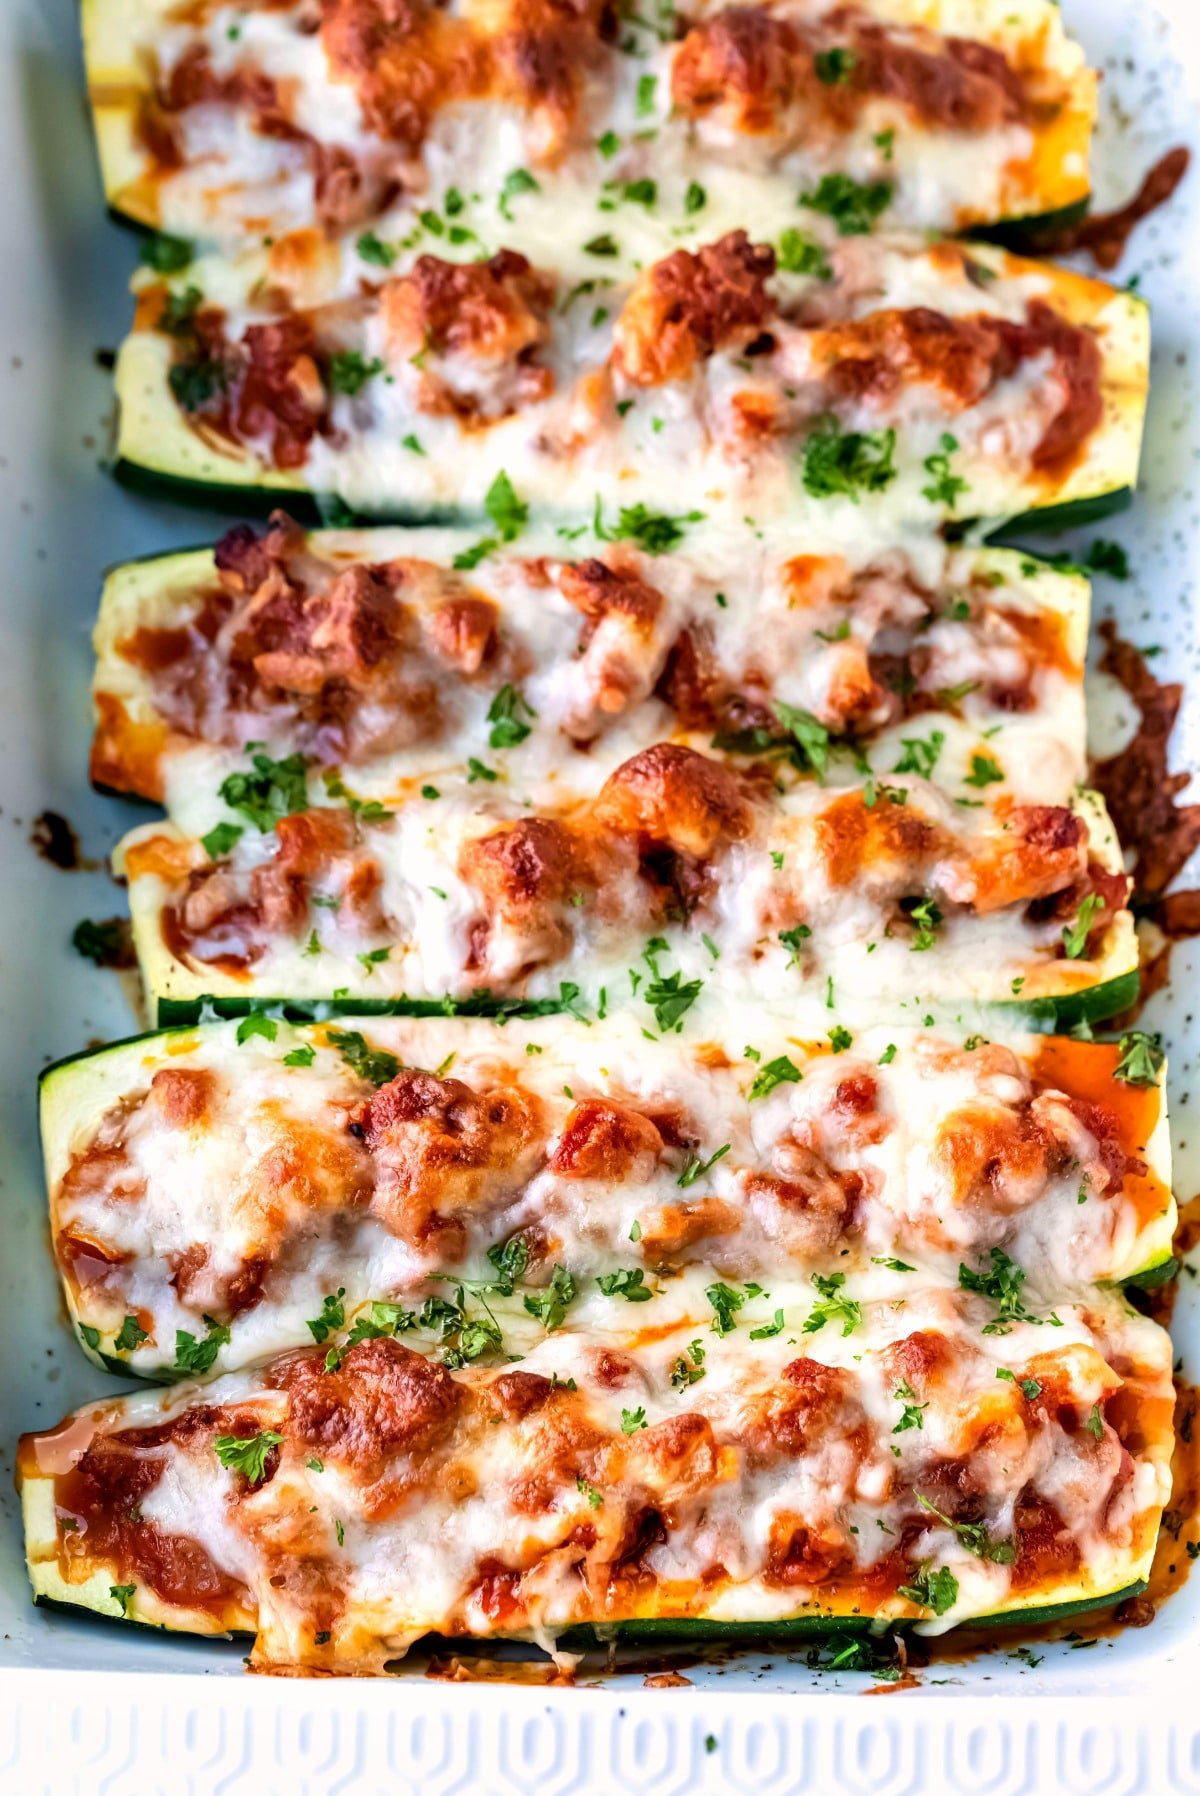 Zucchini boats filled with sausage sauce and cheese